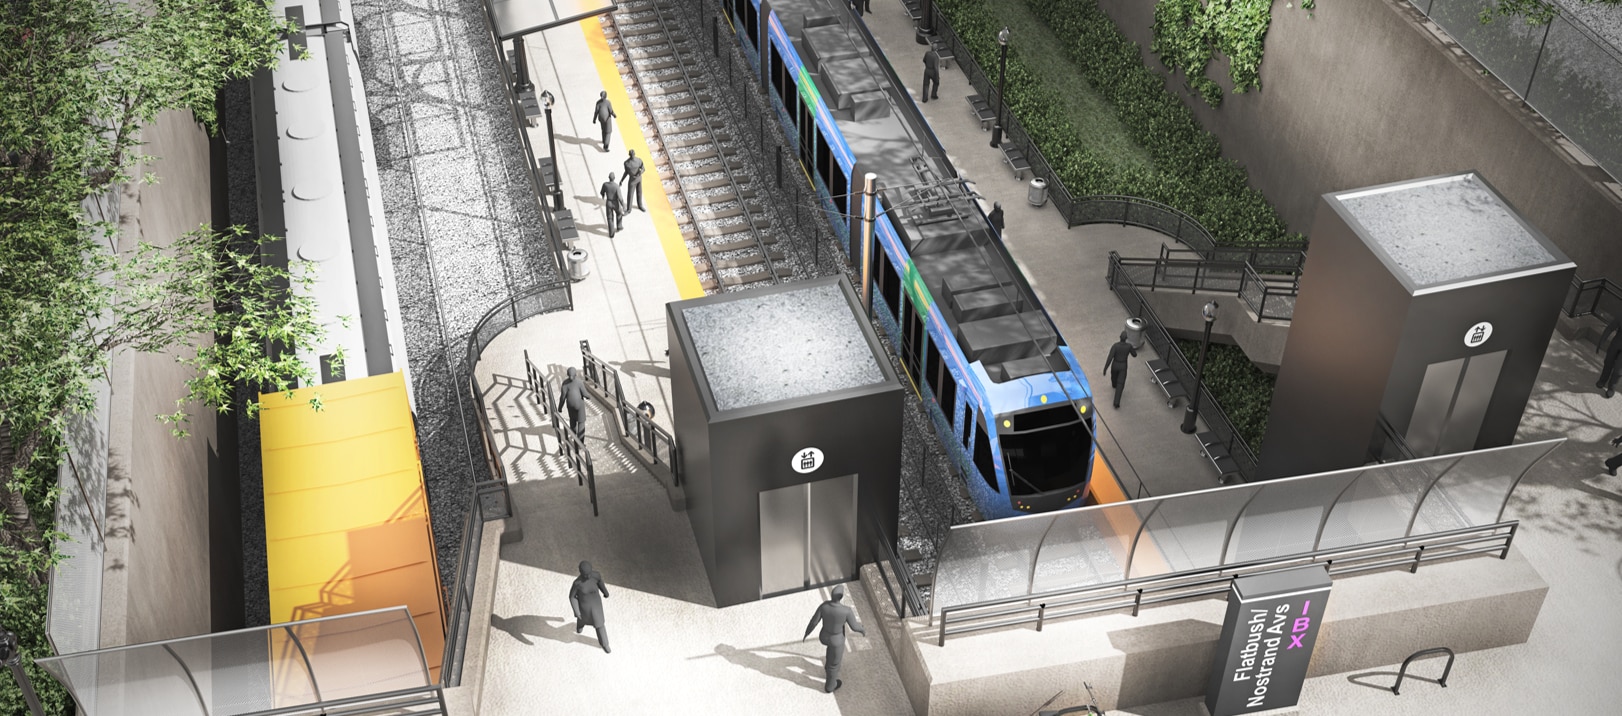 A rendering of the proposed Flatbush/Nostrand Avs station on the Interborough Express